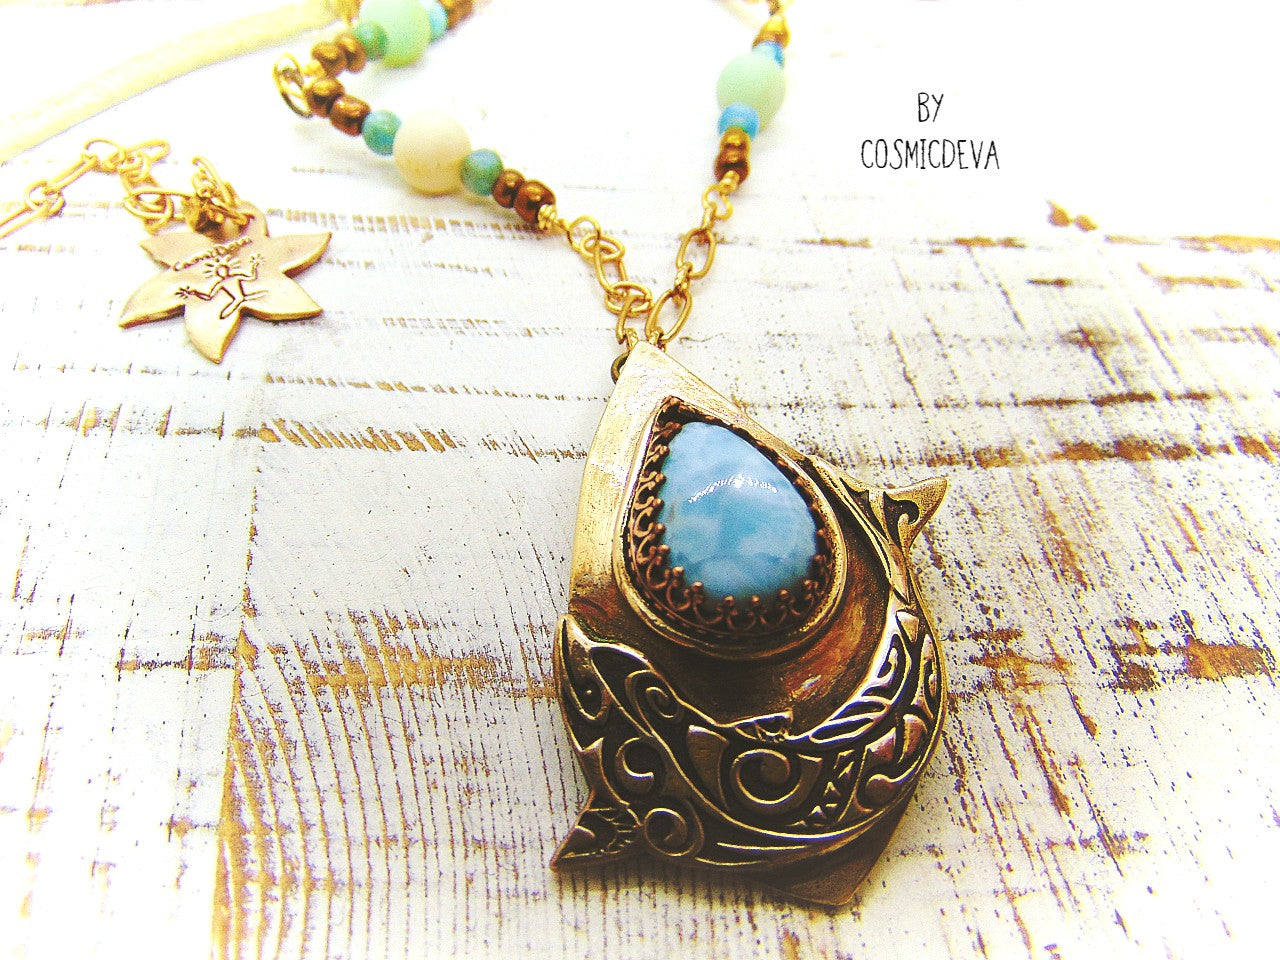 Bring harmony to your life with this beautiful Dolphin Spirit Animal Larimar Bronze Necklace. Handcrafted from solid bronze and adorned with a larimar gemstone, this one-of-a-kind pendant symbolizes the wisdom of Atlantis and healing power of dolphins - sure to bring peace and balance to your life. Finished with white leather and aqua colored jasper and amazonite gemstone beads.